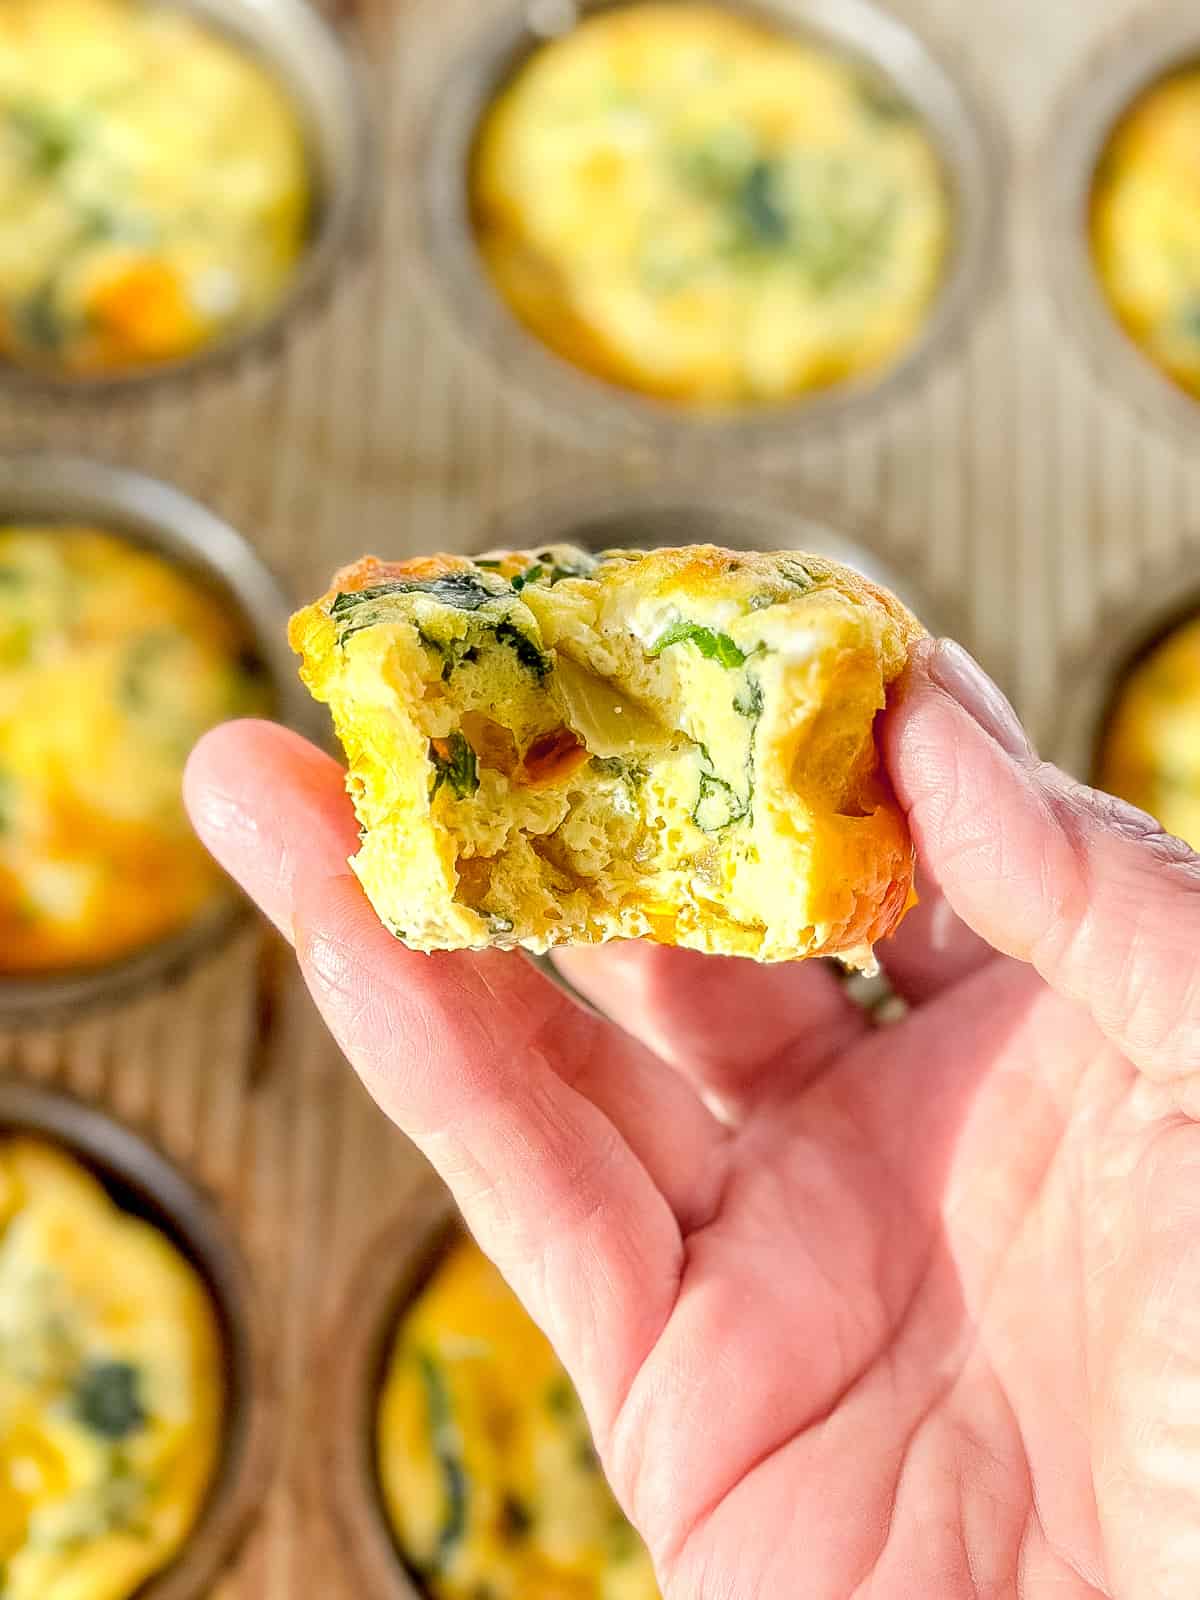 Holding a muffin pan frittata with a bite taken out.